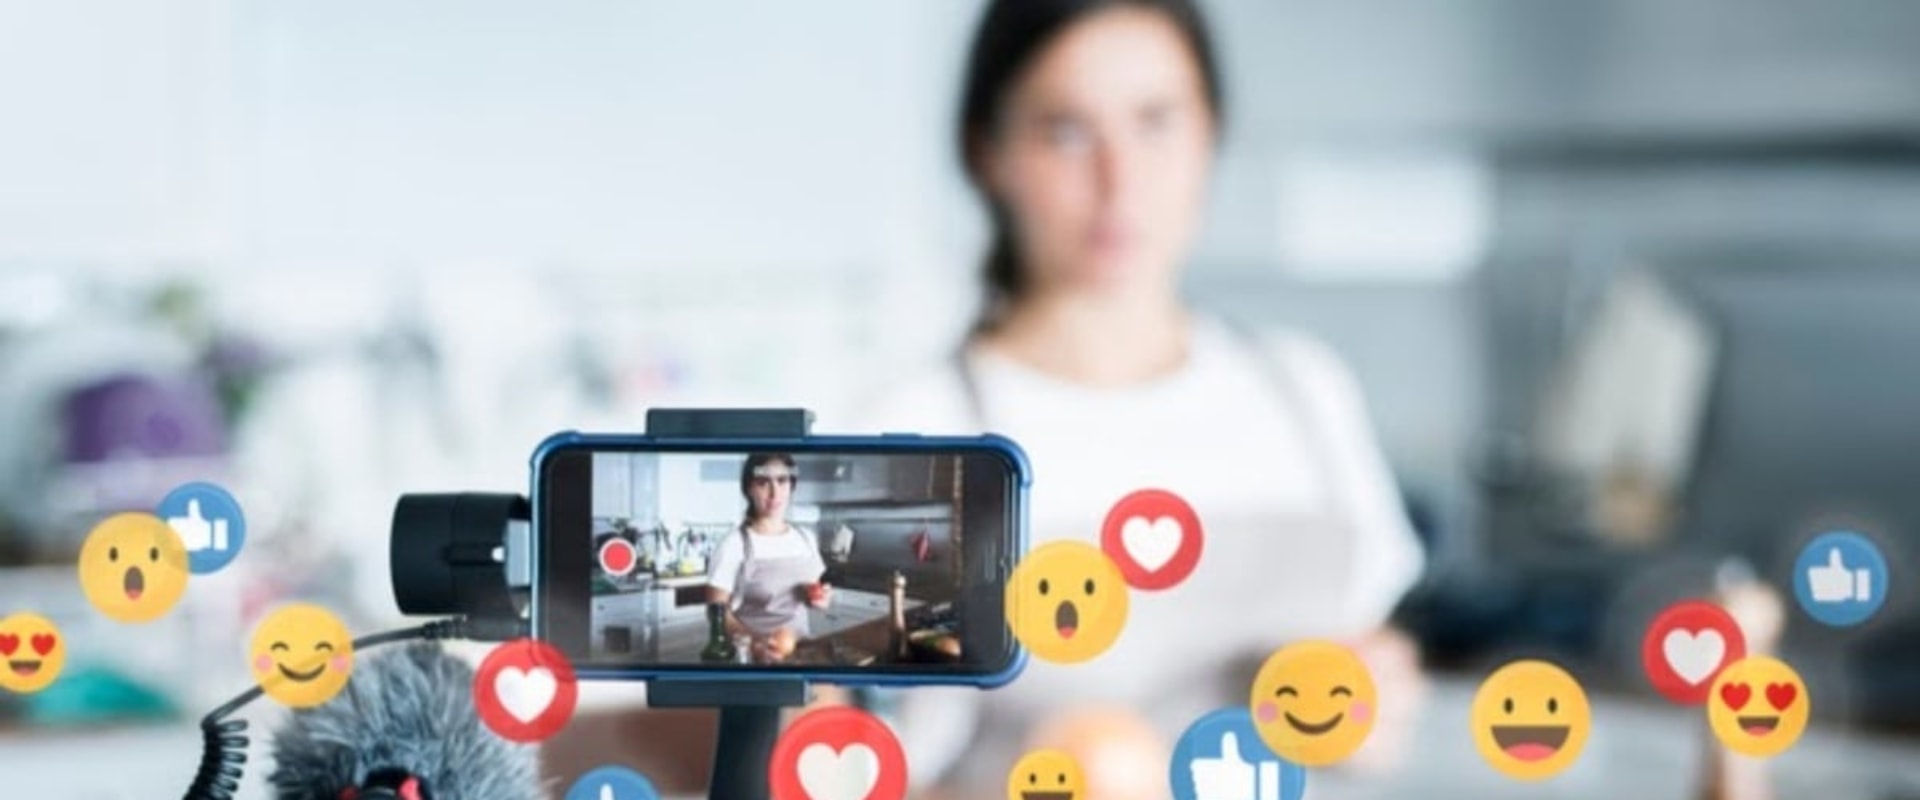 How can i use video content to engage my audience?